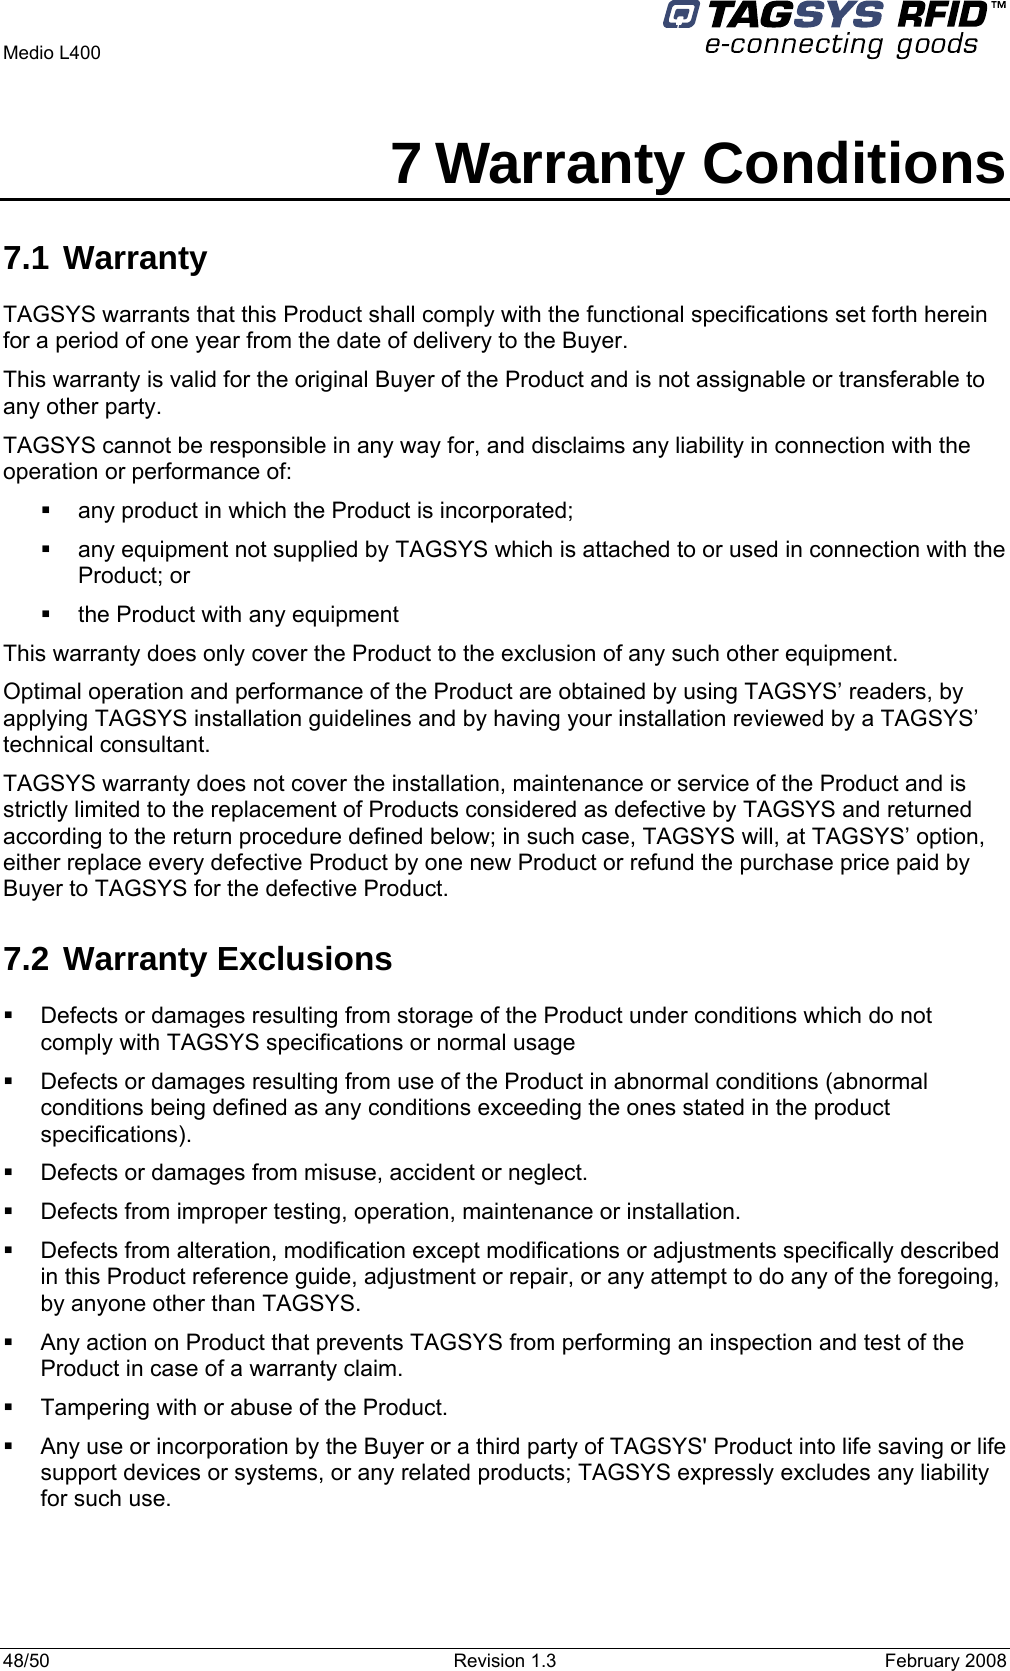   Medio L400 48/50  Revision 1.3  February 2008  7 Warranty Conditions 7.1 Warranty TAGSYS warrants that this Product shall comply with the functional specifications set forth herein for a period of one year from the date of delivery to the Buyer. This warranty is valid for the original Buyer of the Product and is not assignable or transferable to any other party. TAGSYS cannot be responsible in any way for, and disclaims any liability in connection with the operation or performance of:   any product in which the Product is incorporated;   any equipment not supplied by TAGSYS which is attached to or used in connection with the Product; or   the Product with any equipment This warranty does only cover the Product to the exclusion of any such other equipment. Optimal operation and performance of the Product are obtained by using TAGSYS’ readers, by applying TAGSYS installation guidelines and by having your installation reviewed by a TAGSYS’ technical consultant. TAGSYS warranty does not cover the installation, maintenance or service of the Product and is strictly limited to the replacement of Products considered as defective by TAGSYS and returned according to the return procedure defined below; in such case, TAGSYS will, at TAGSYS’ option, either replace every defective Product by one new Product or refund the purchase price paid by Buyer to TAGSYS for the defective Product. 7.2 Warranty Exclusions   Defects or damages resulting from storage of the Product under conditions which do not comply with TAGSYS specifications or normal usage   Defects or damages resulting from use of the Product in abnormal conditions (abnormal conditions being defined as any conditions exceeding the ones stated in the product specifications).   Defects or damages from misuse, accident or neglect.   Defects from improper testing, operation, maintenance or installation.   Defects from alteration, modification except modifications or adjustments specifically described in this Product reference guide, adjustment or repair, or any attempt to do any of the foregoing, by anyone other than TAGSYS.   Any action on Product that prevents TAGSYS from performing an inspection and test of the Product in case of a warranty claim.   Tampering with or abuse of the Product.   Any use or incorporation by the Buyer or a third party of TAGSYS&apos; Product into life saving or life support devices or systems, or any related products; TAGSYS expressly excludes any liability for such use. 